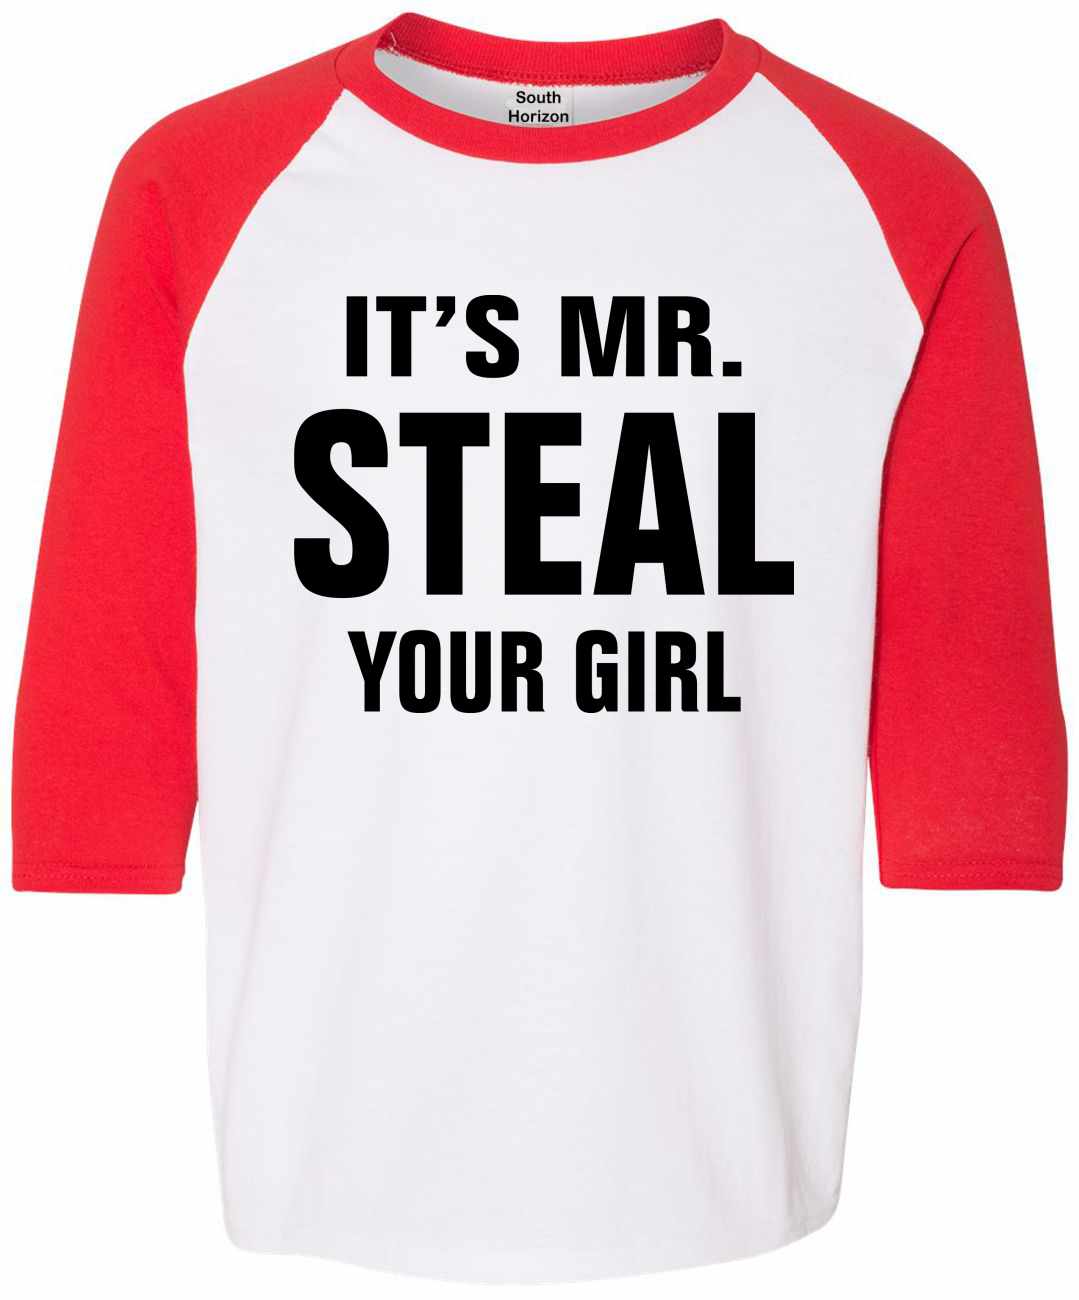 IT'S MR. STEAL YOUR GIRL on Youth Baseball Shirt (#906-212)